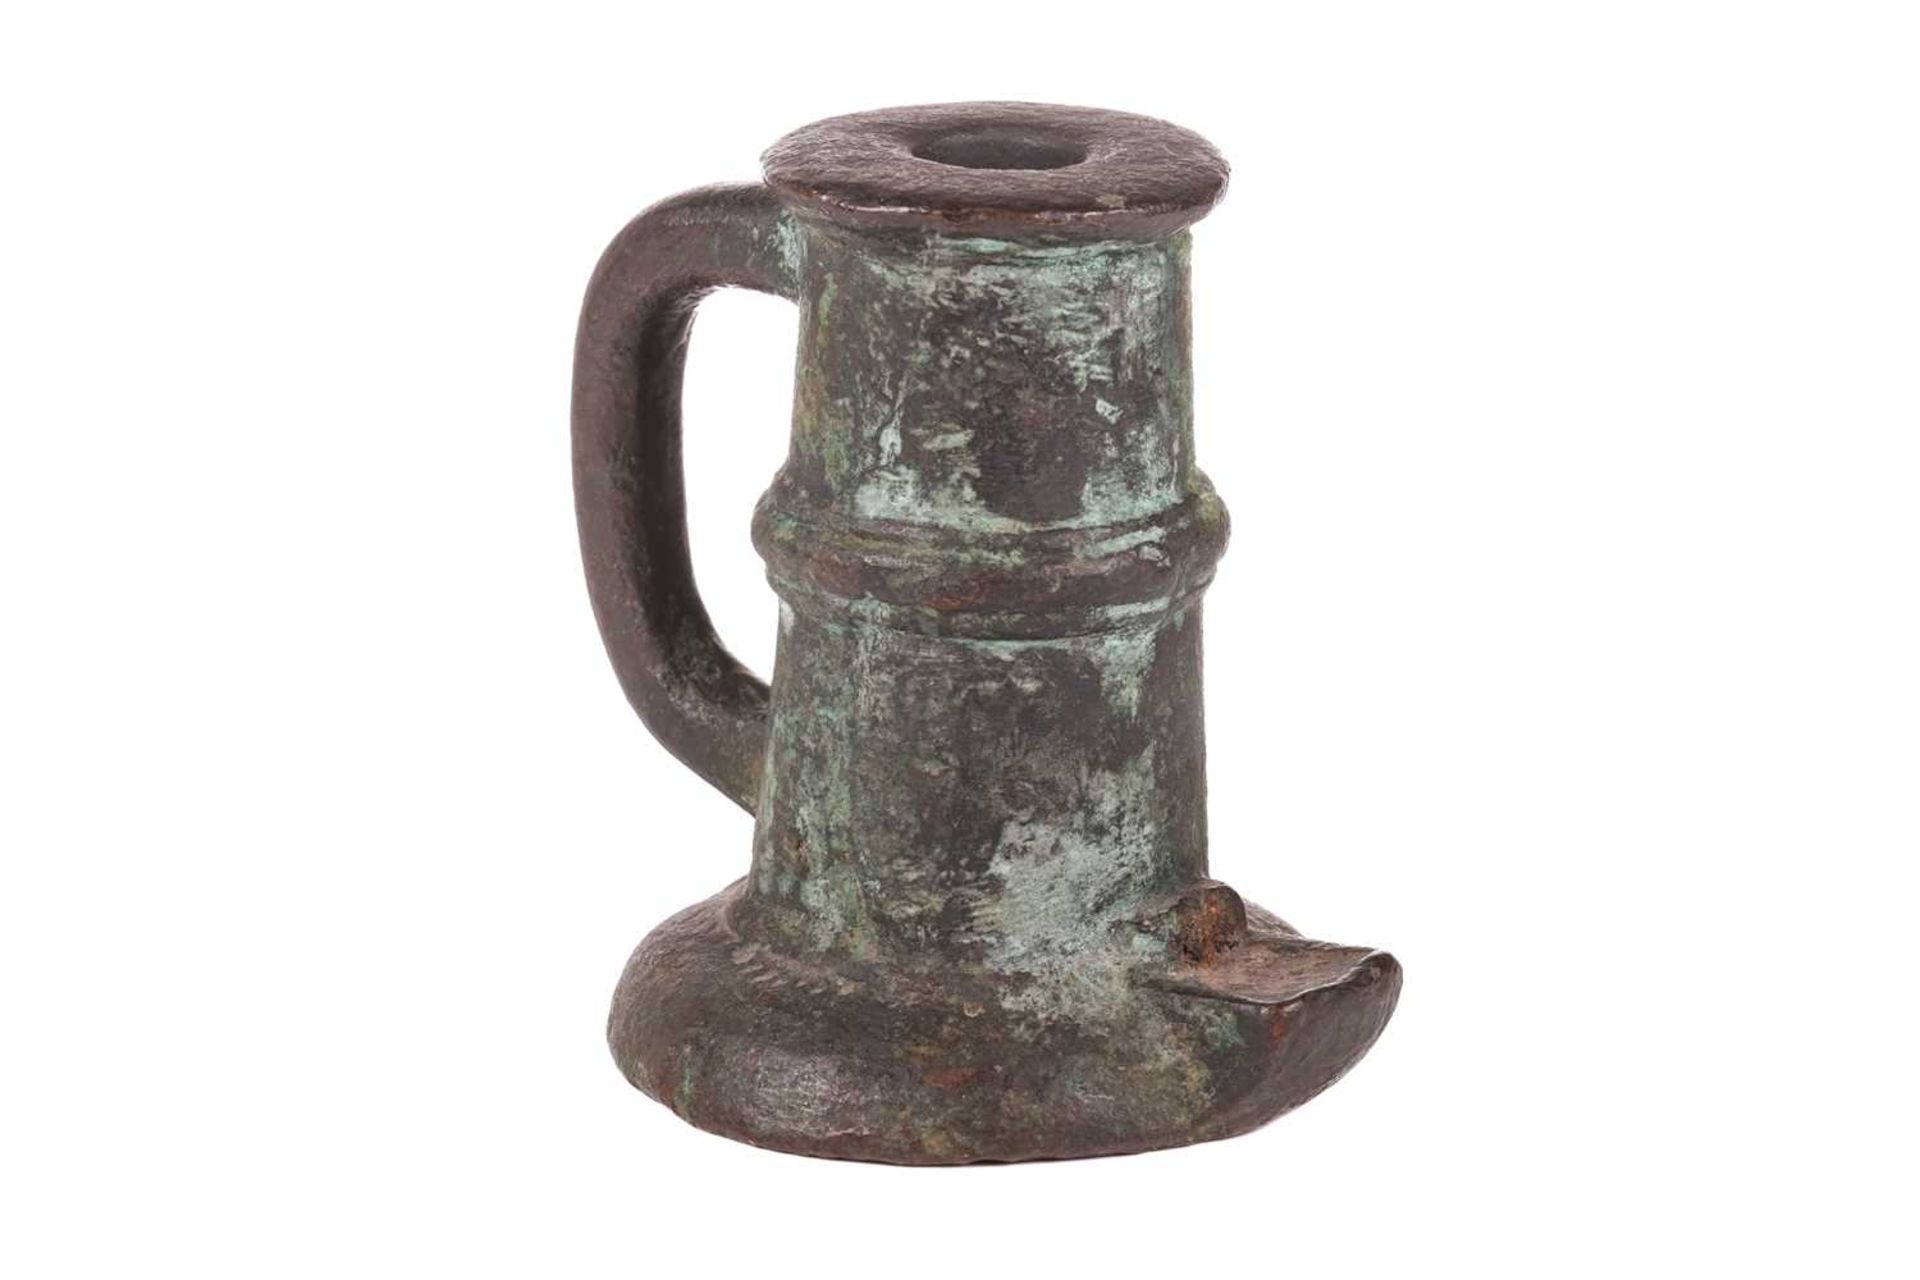 A 17th or 18th-century bronze thunder mug (signal cannon), with loop handle and ribbed centre, on a  - Image 3 of 6